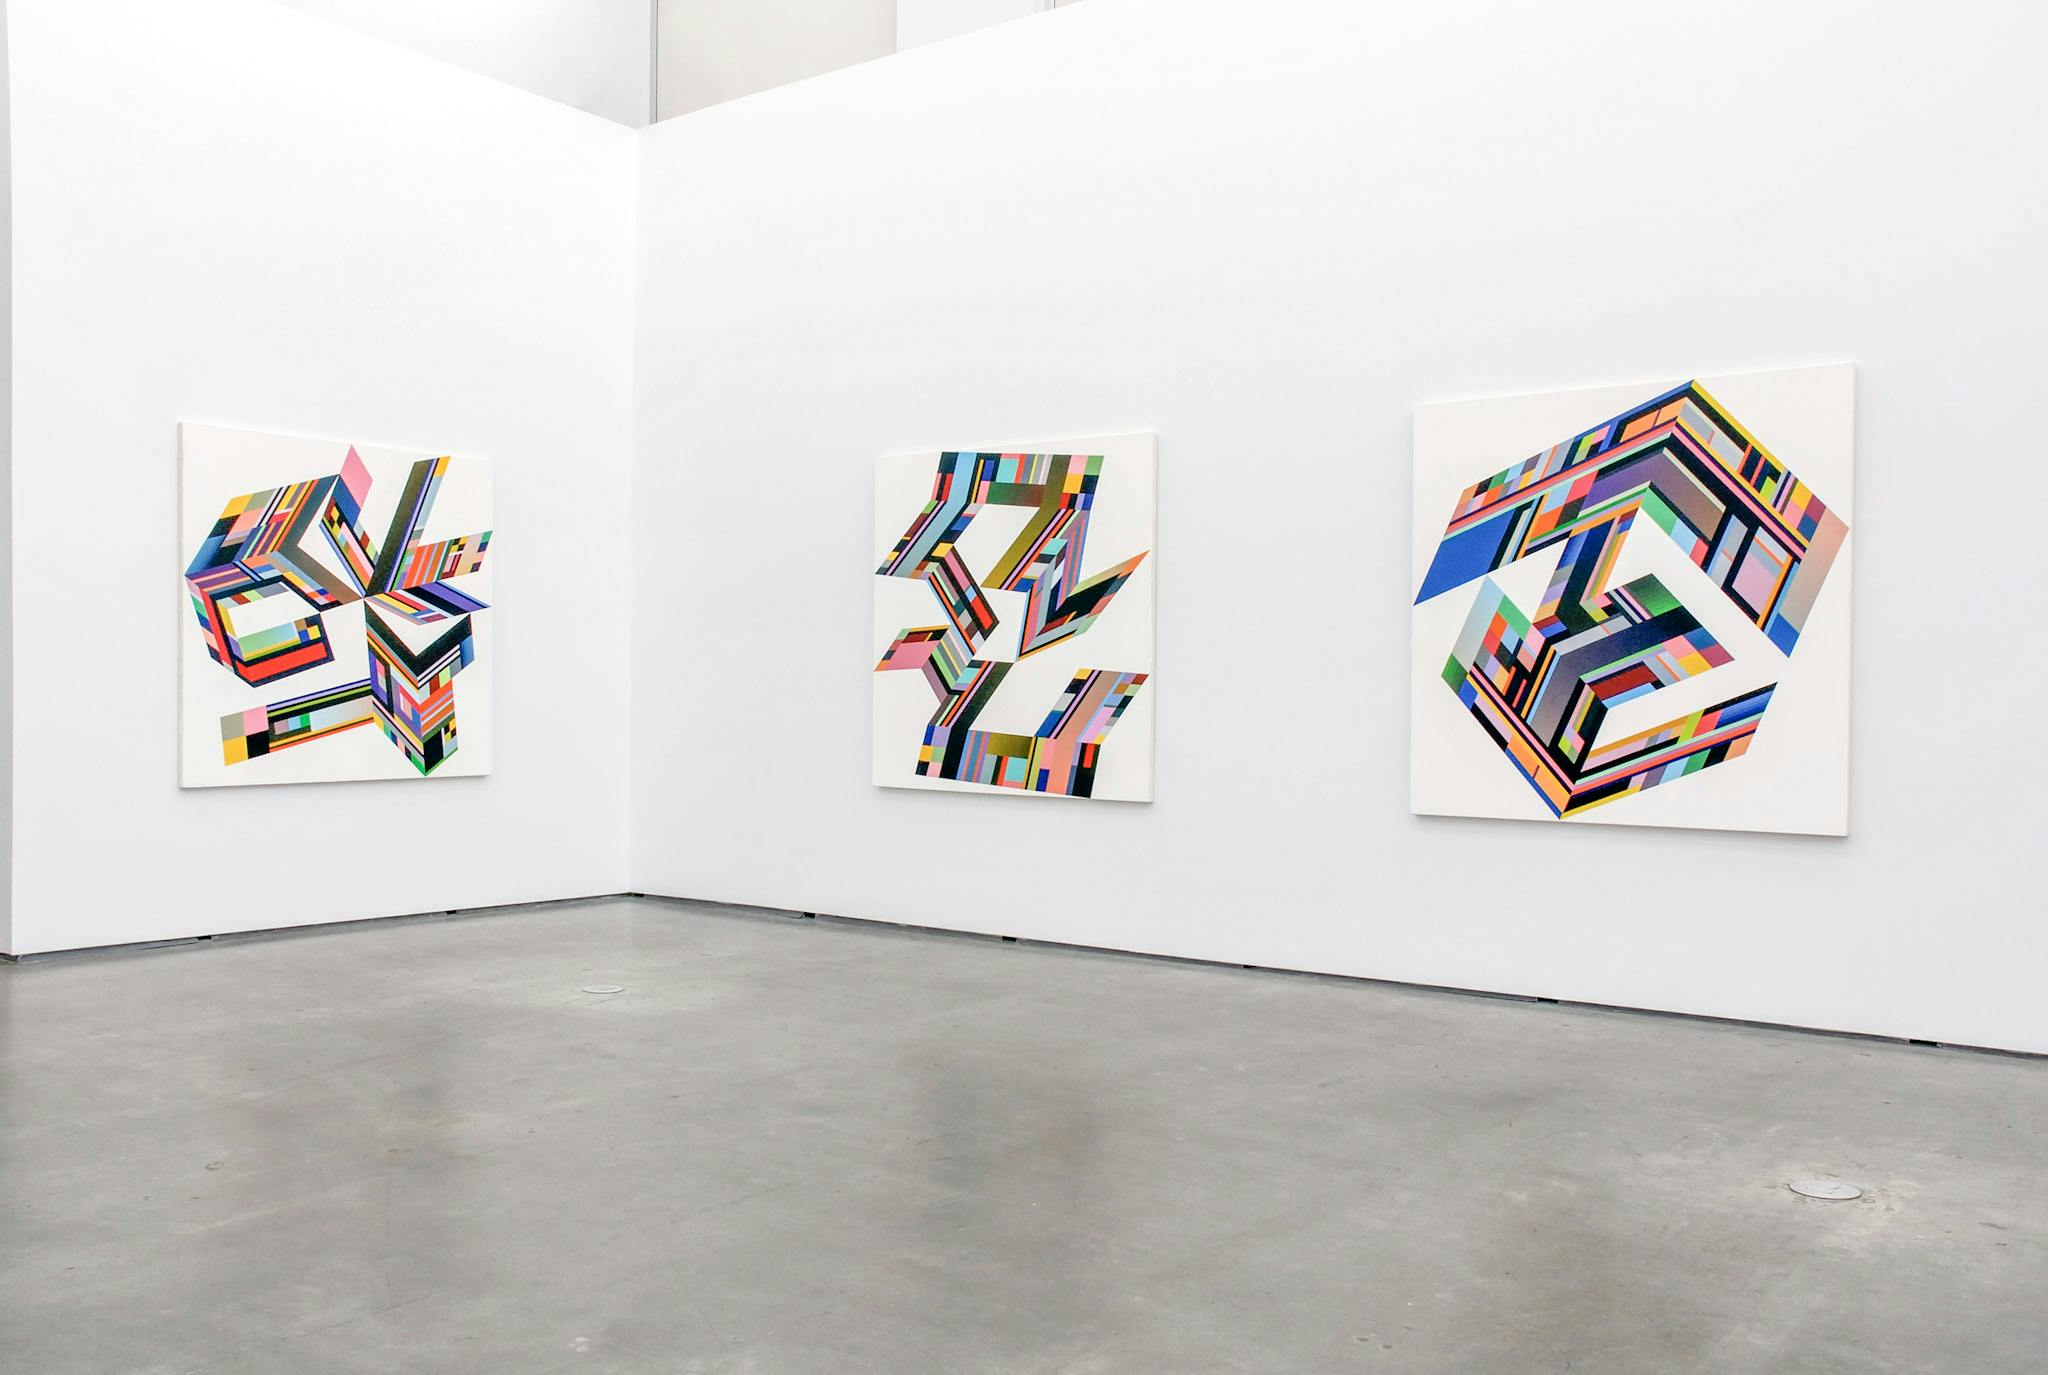 Three graphic designed works are mounted on the gallery walls. On each white canvas, an abstract shape is drawn with the combinations of various coloured cells.  